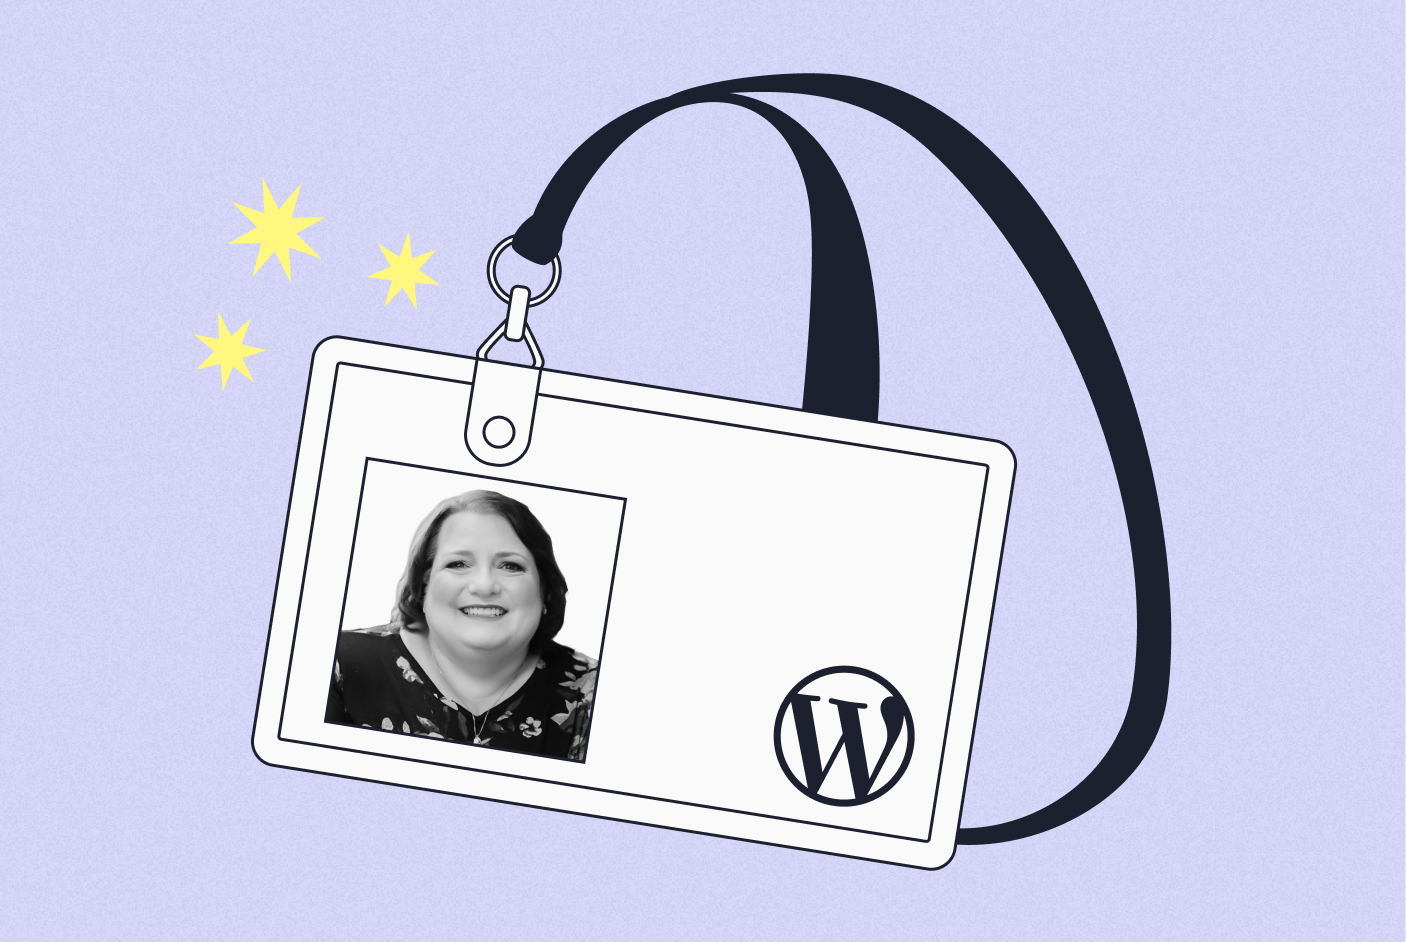 A lanyard with a WordCamp badge with the WordPress logo and Michelle's headshot.